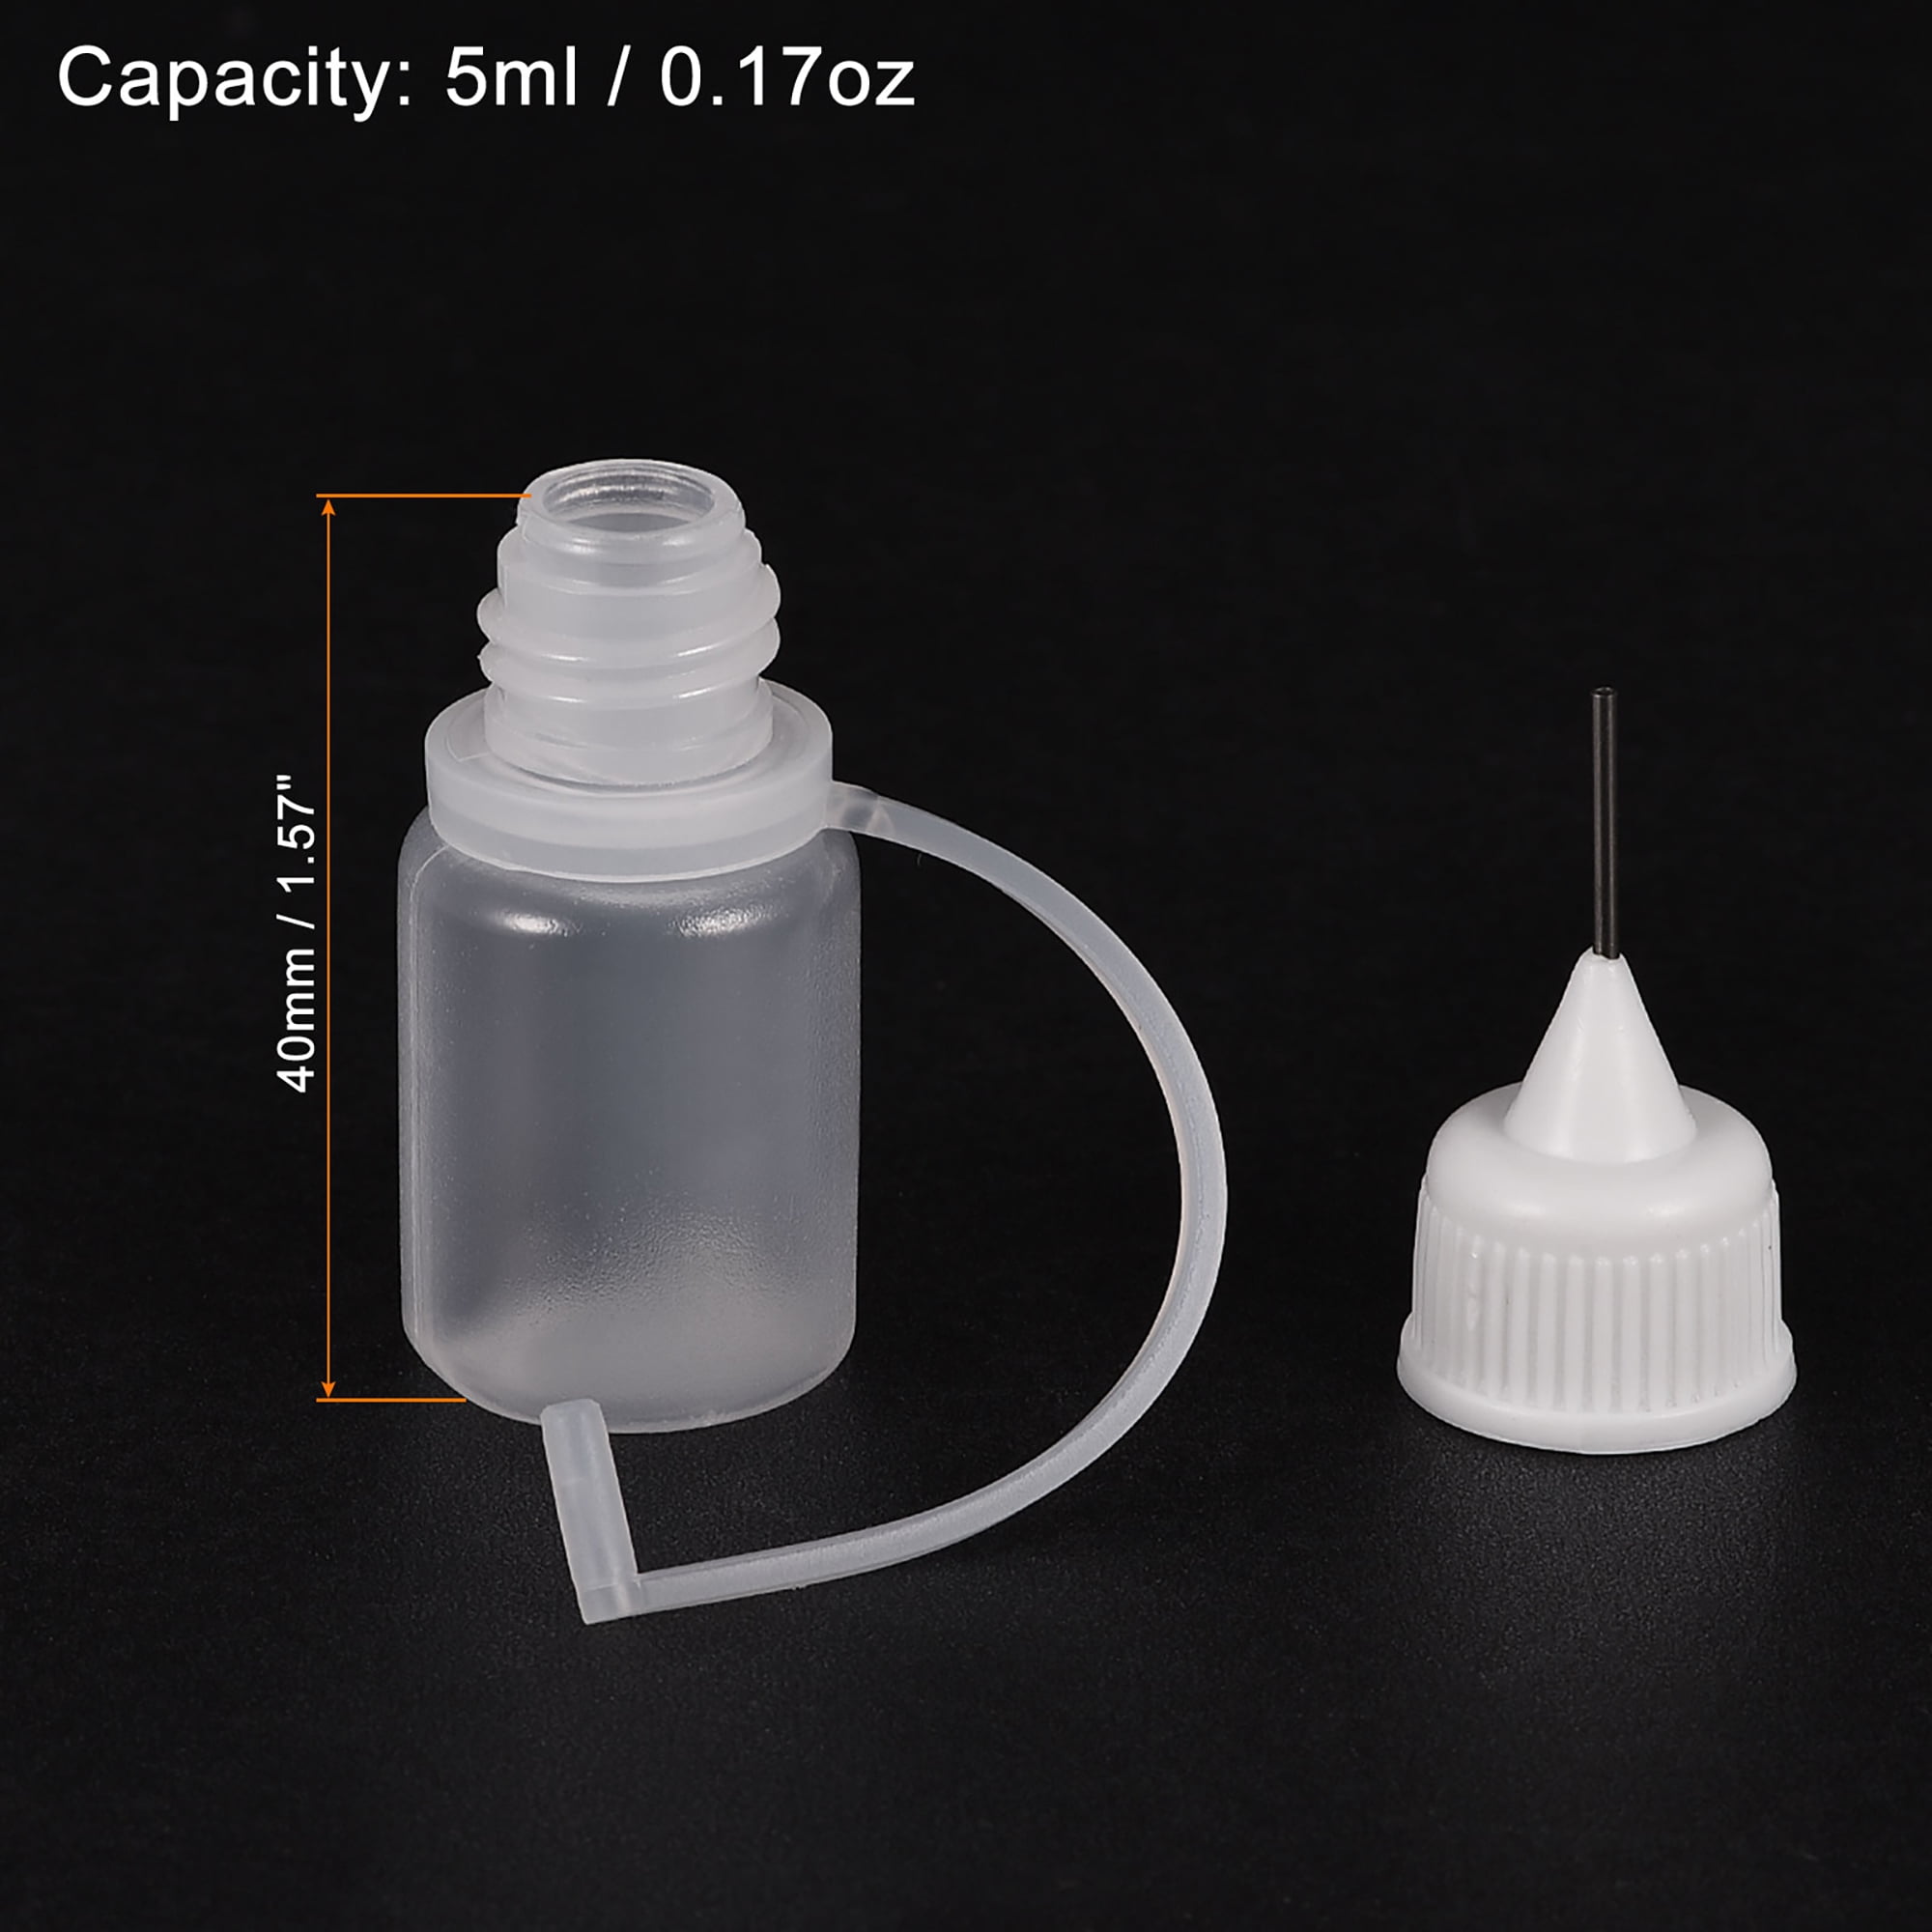 Wholesale Needle Bottle Plastic Needle Bottle For Liquid With Colorful Cap  Tip 5ml 10ml 15ml 20ml 30ml 50ml Empty Bottle Voptw From Hotbottle7, $0.49